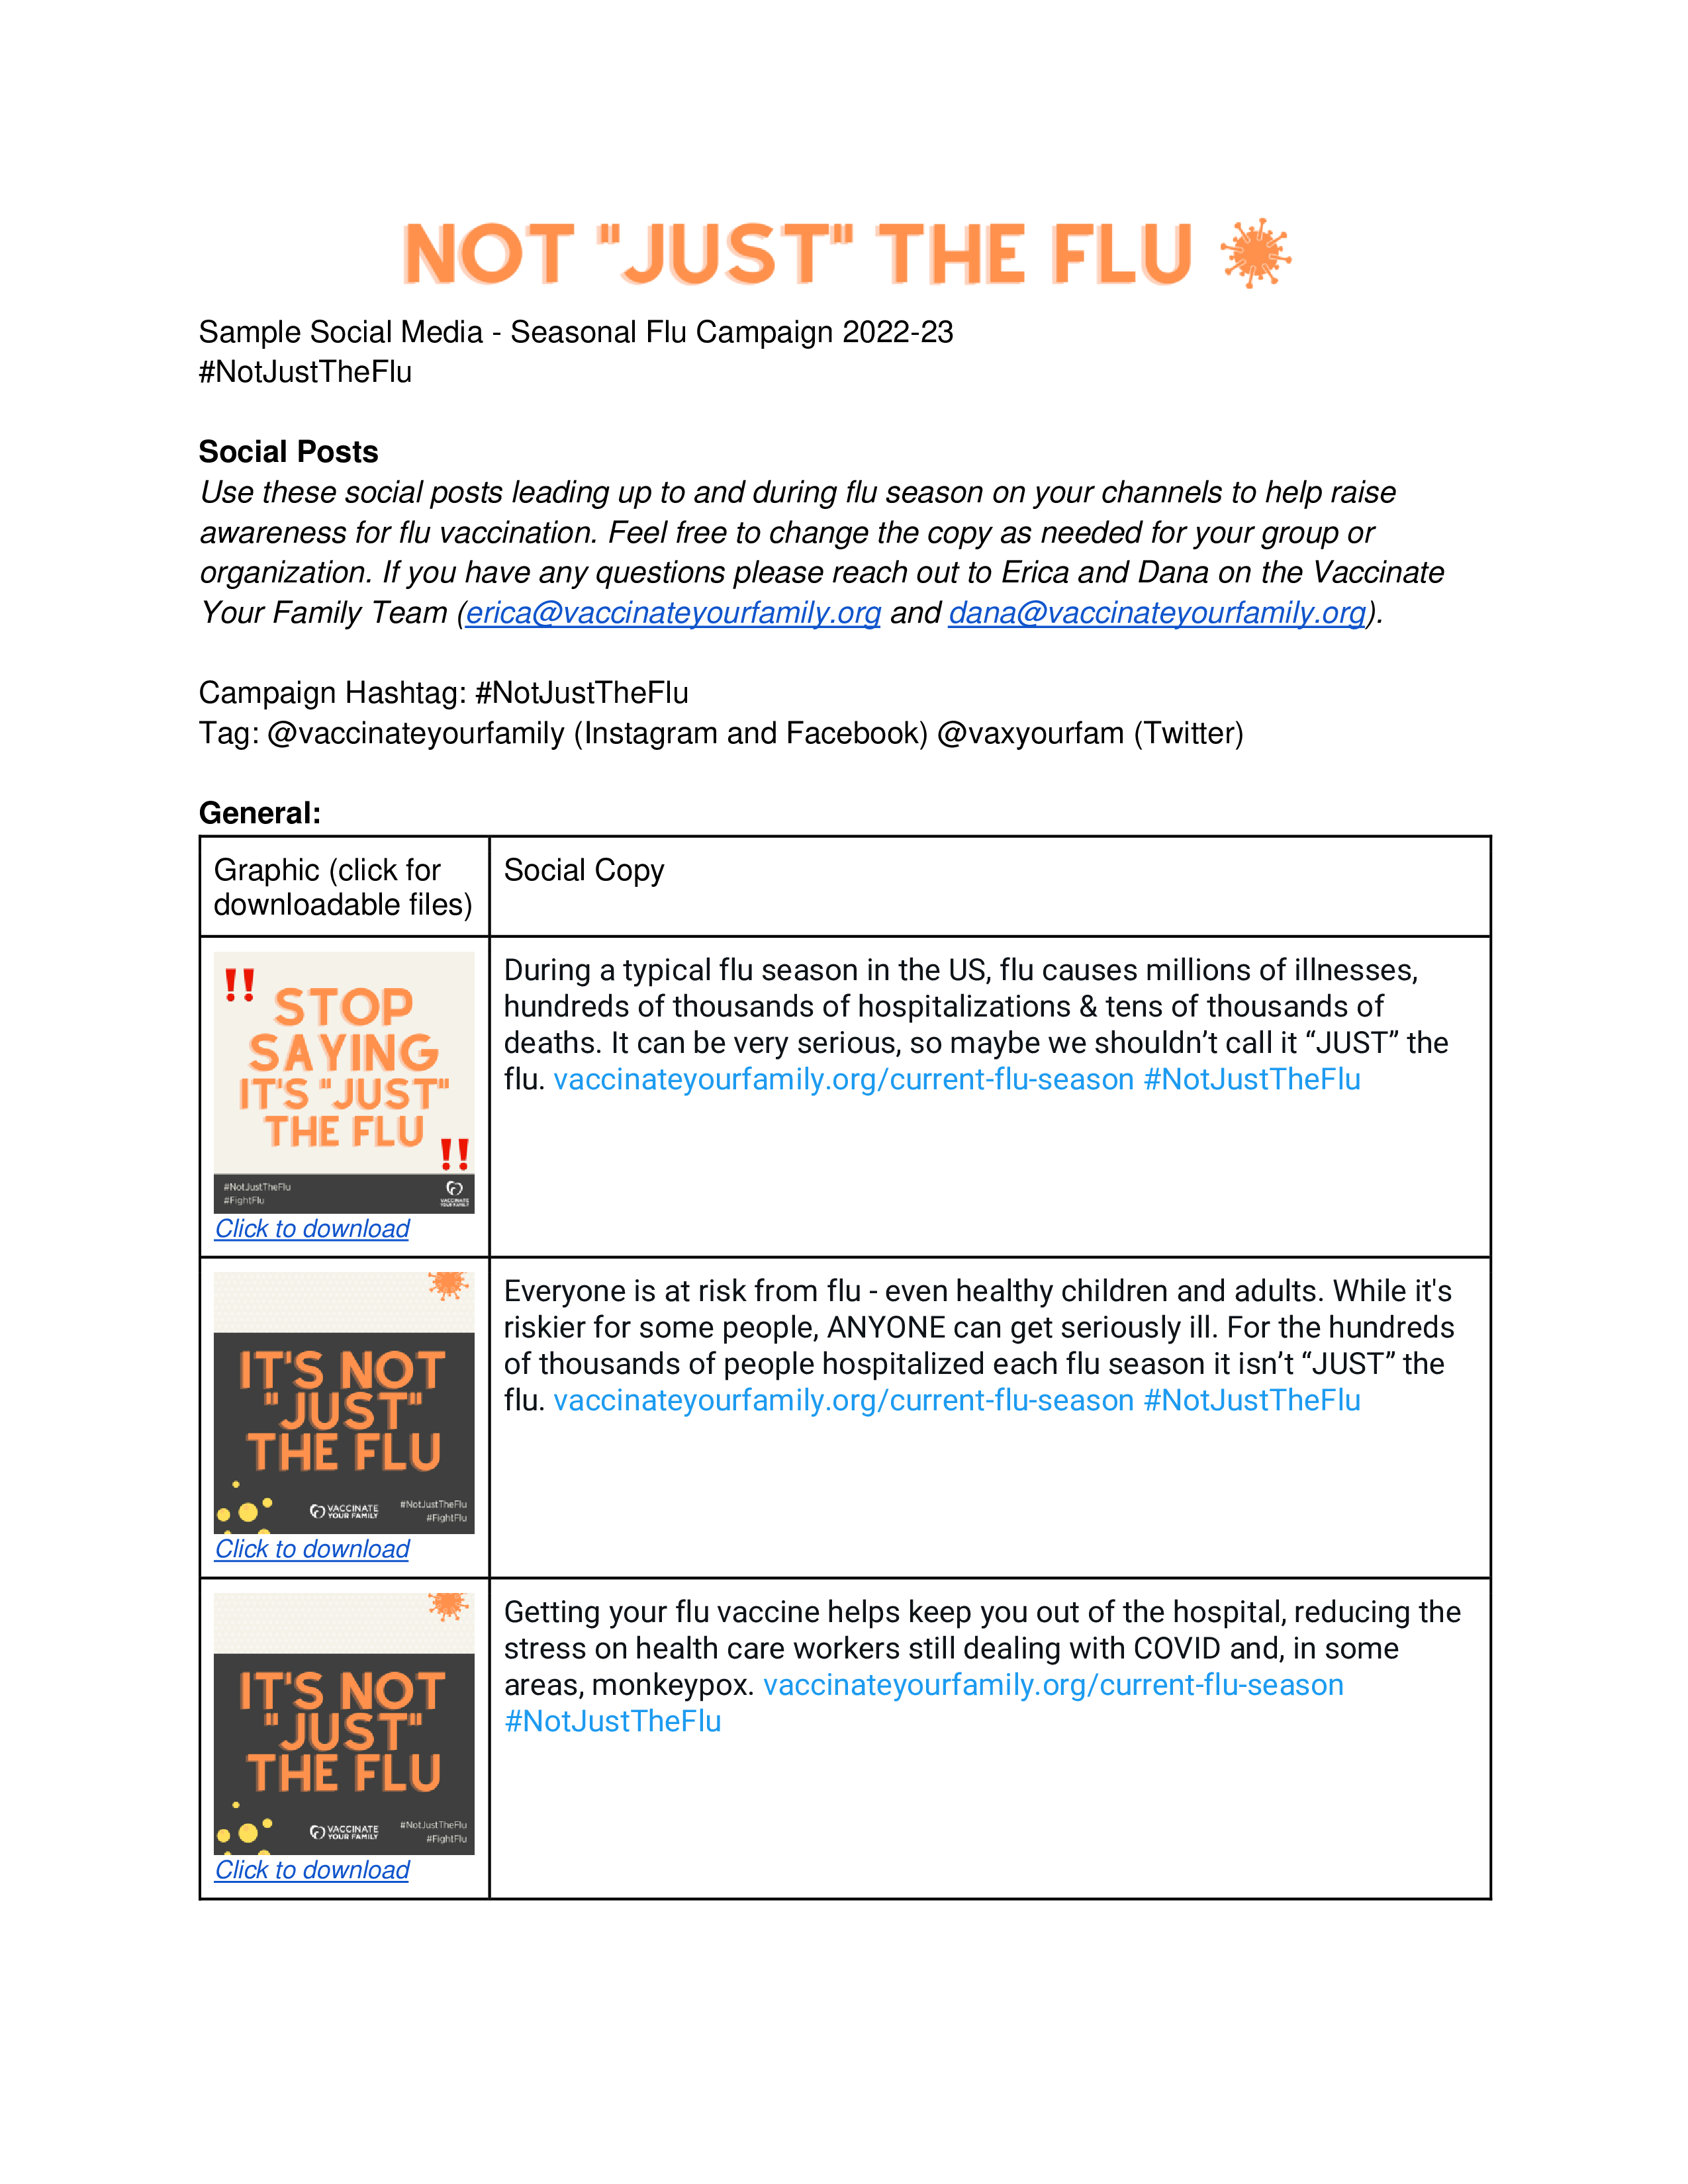 Factsheet with black and orange text with graphics for social media download and sample language and hashtags to use for social media posts.